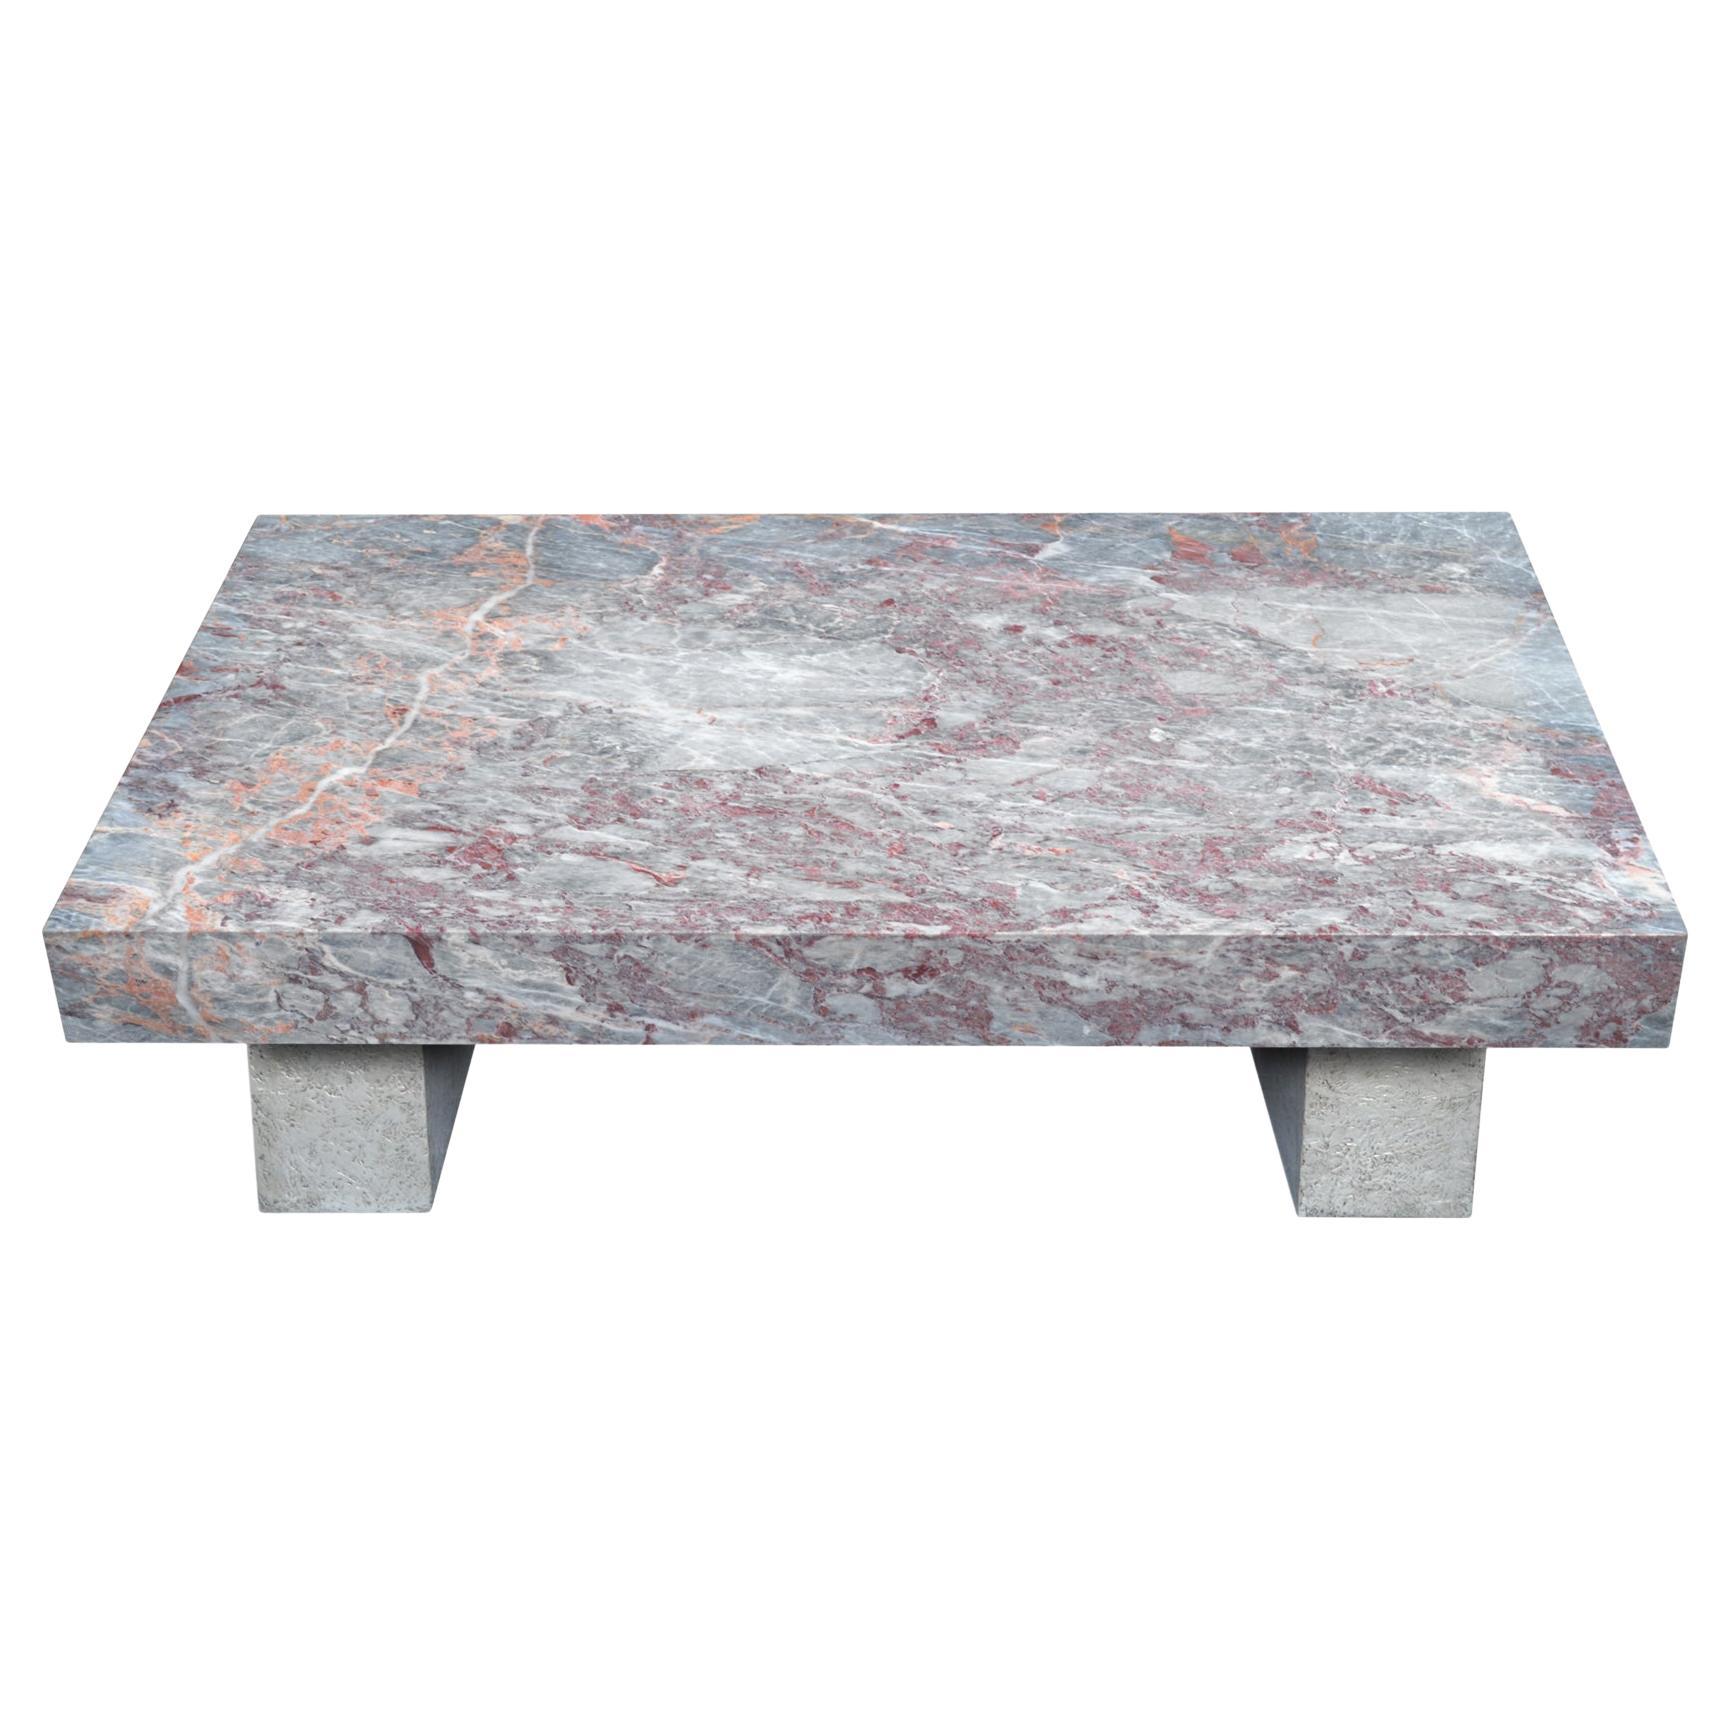 Coffee table marble top texturised legs handmade in Italy by Cupioli available For Sale